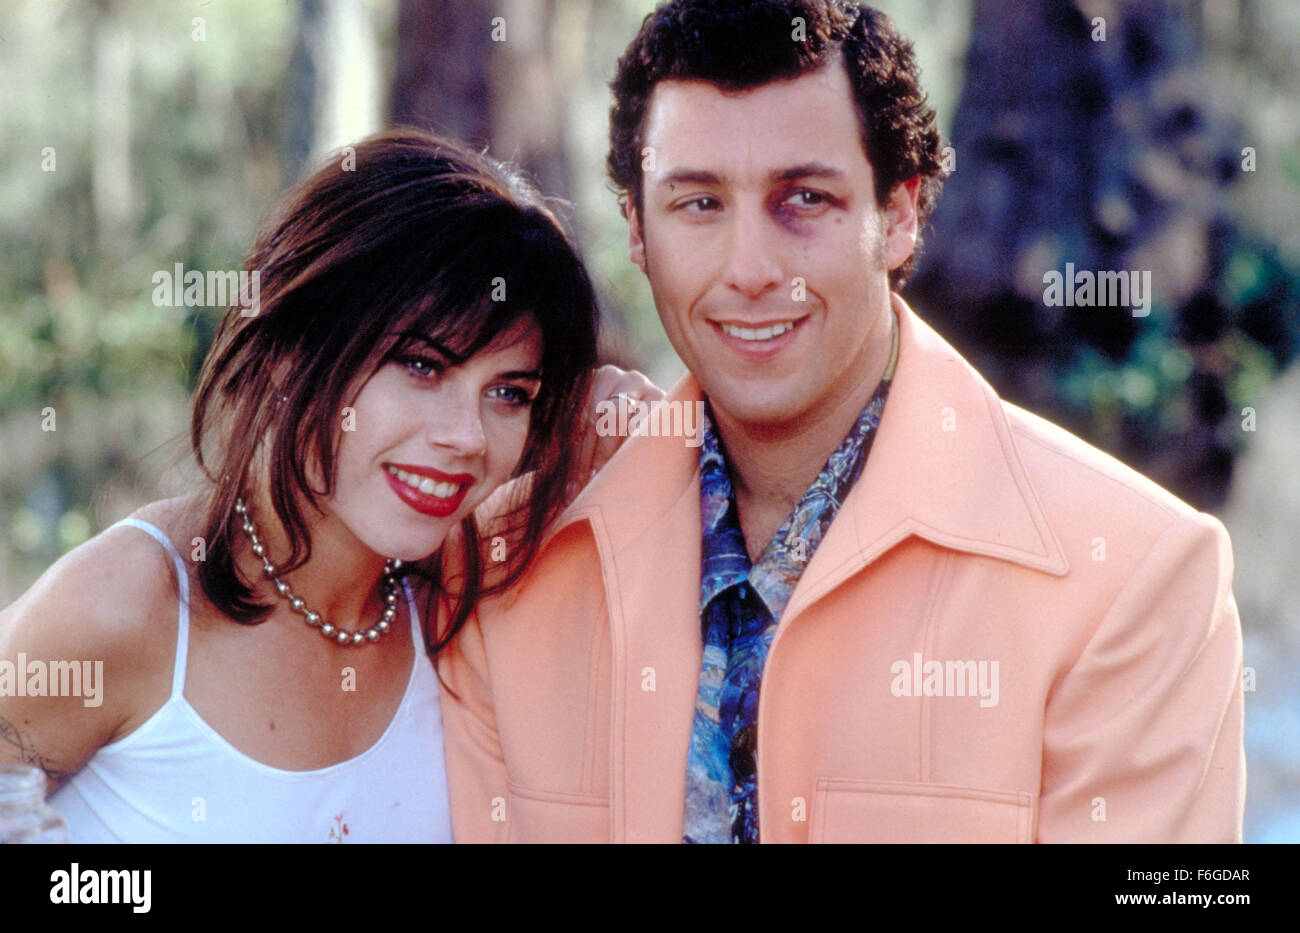 Nov 06, 1998; Orlando, FL, USA; FAIRUZA BALK and ADAM SANDLER star as Vicki Vallencourt and Bobby Boucher in the comedy 'The Waterboy' directed by Frank Coraci. Stock Photo